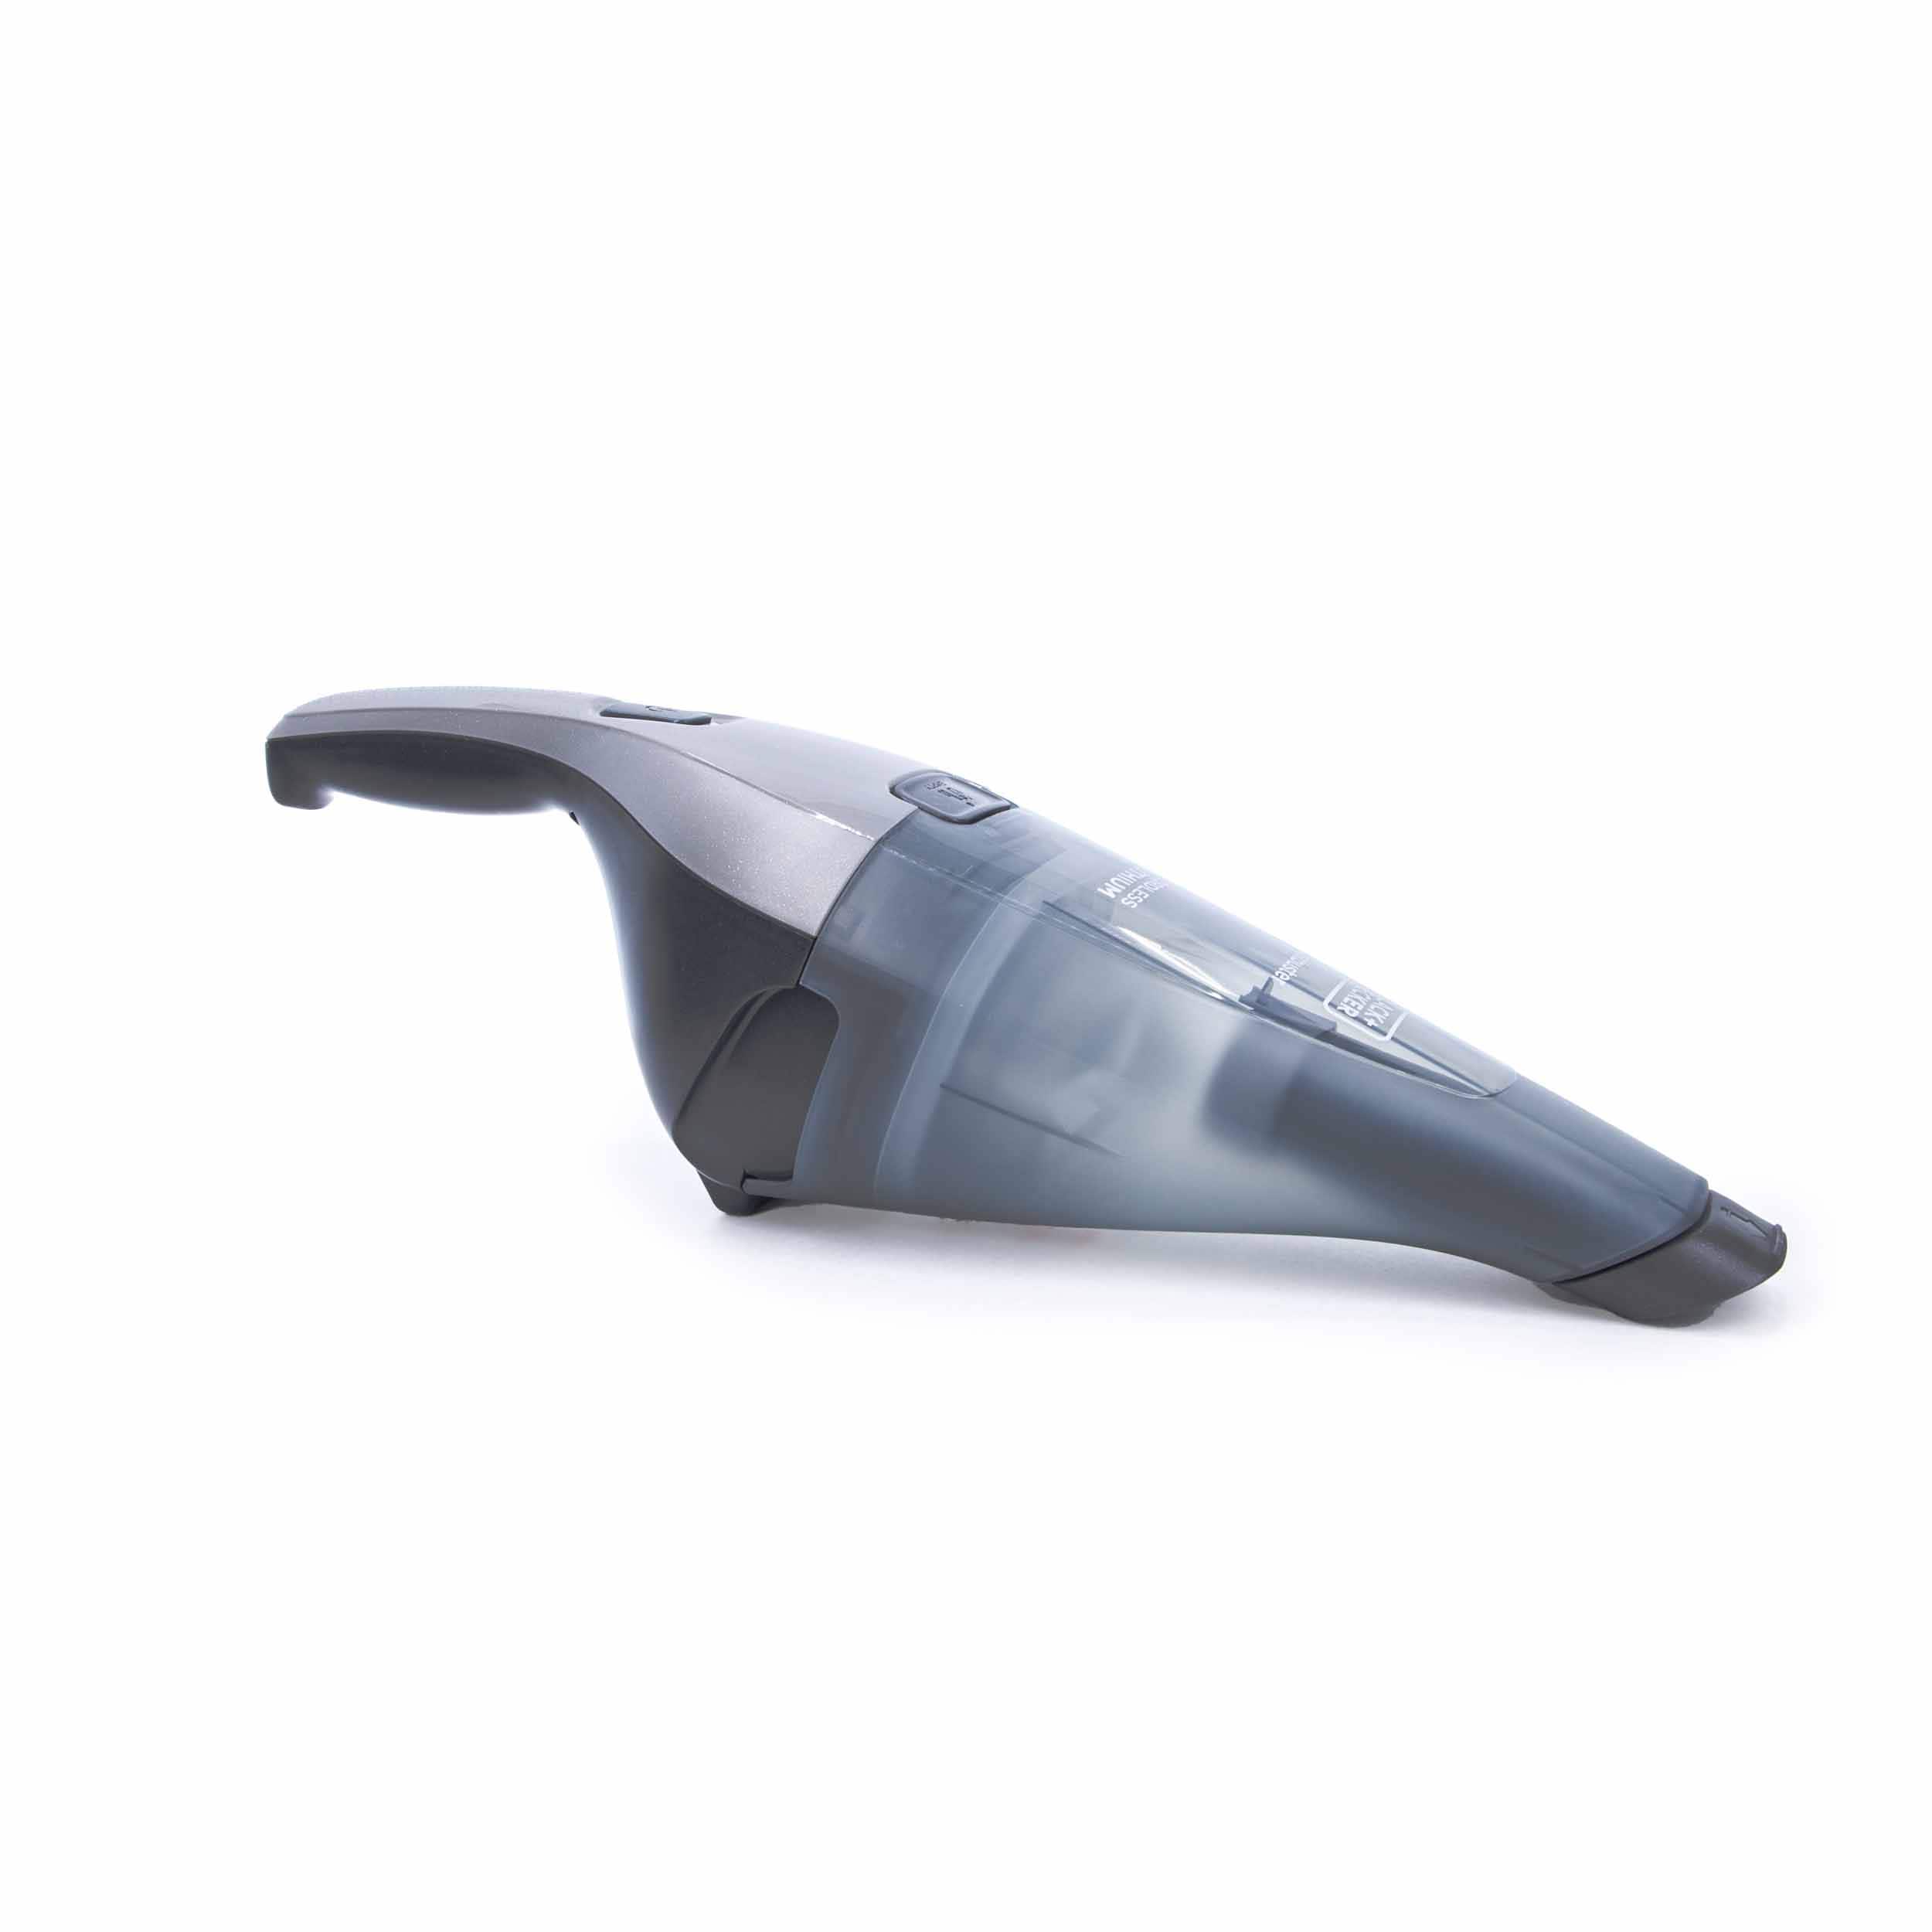 Dustbuster QuickClean Vacuum Cleaners at